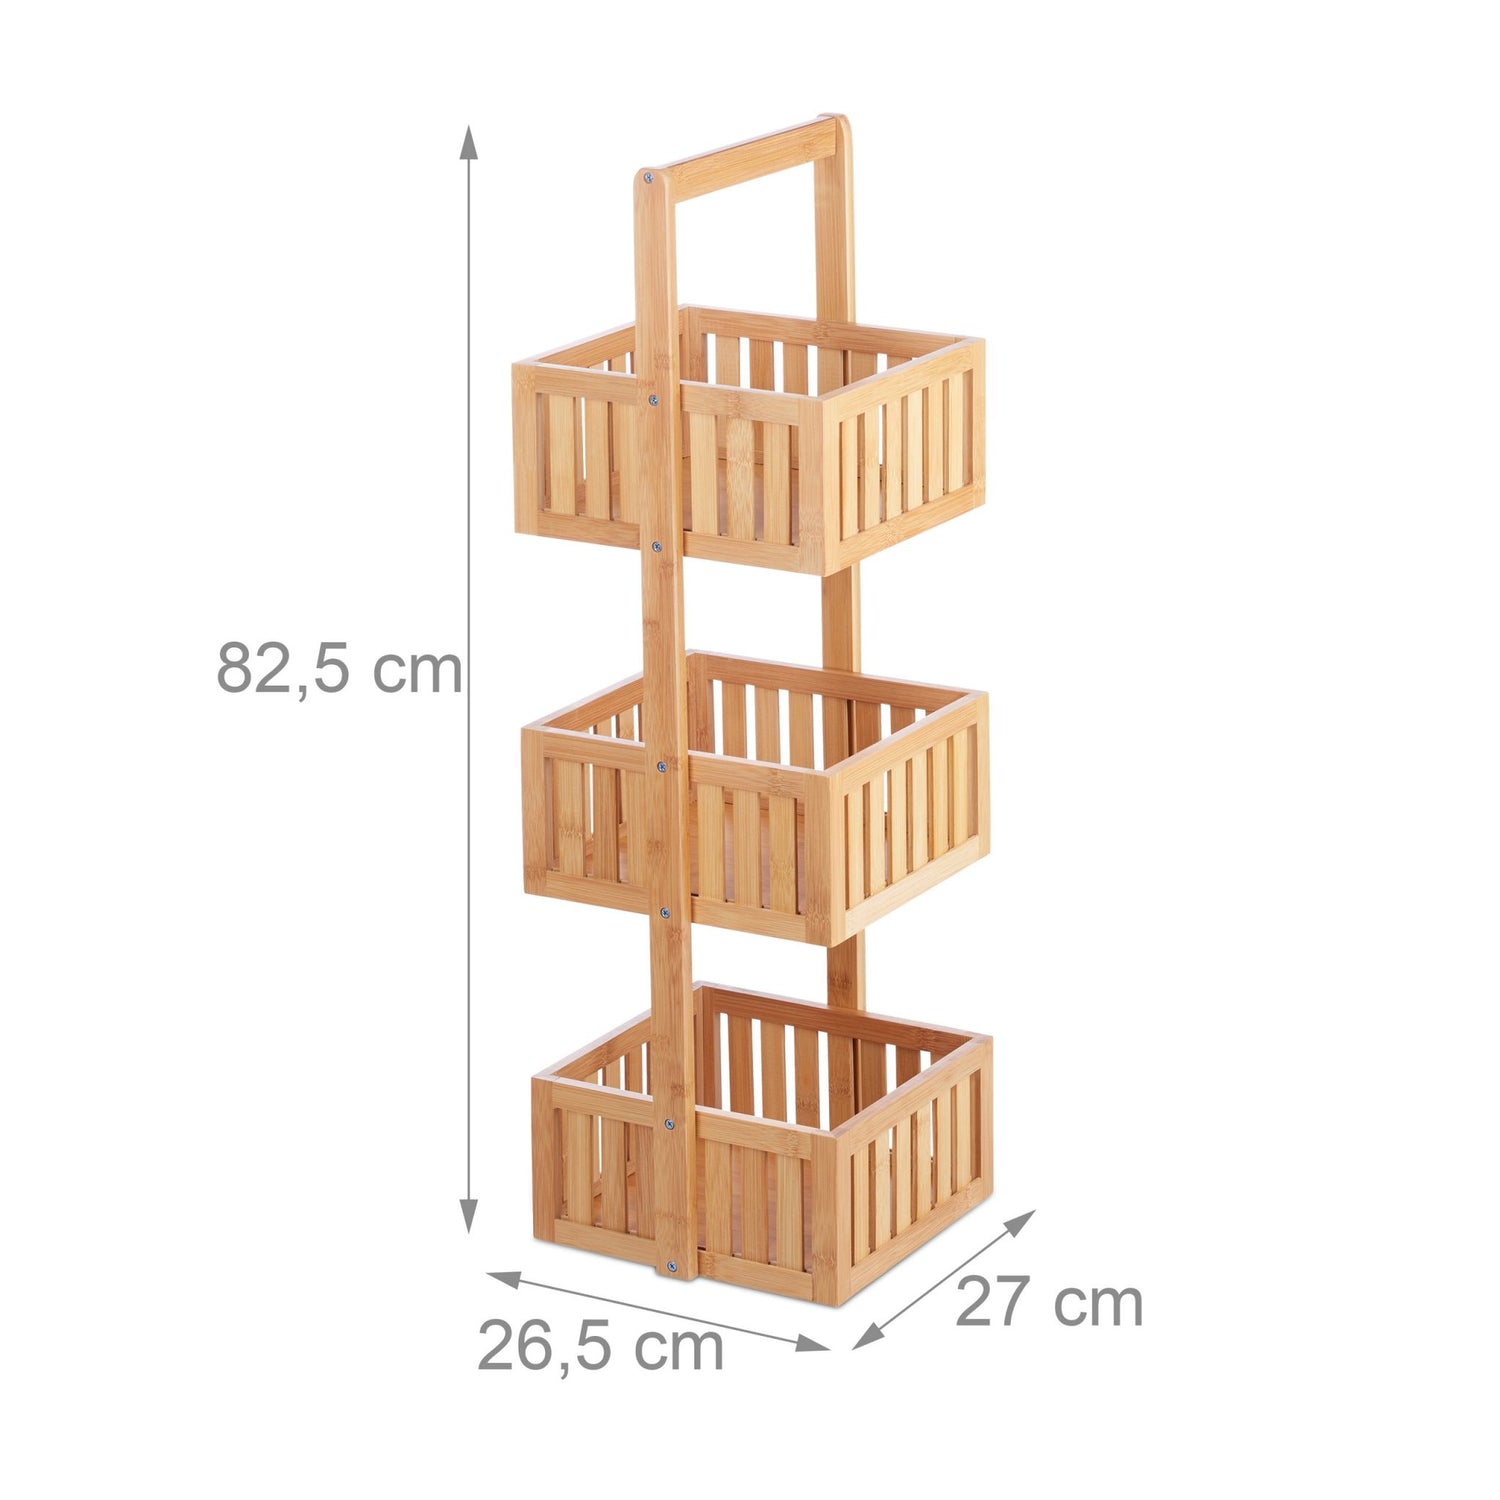 RelaxDays 3-Tier Bamboo Shower Caddy Bamboo Bathrooms